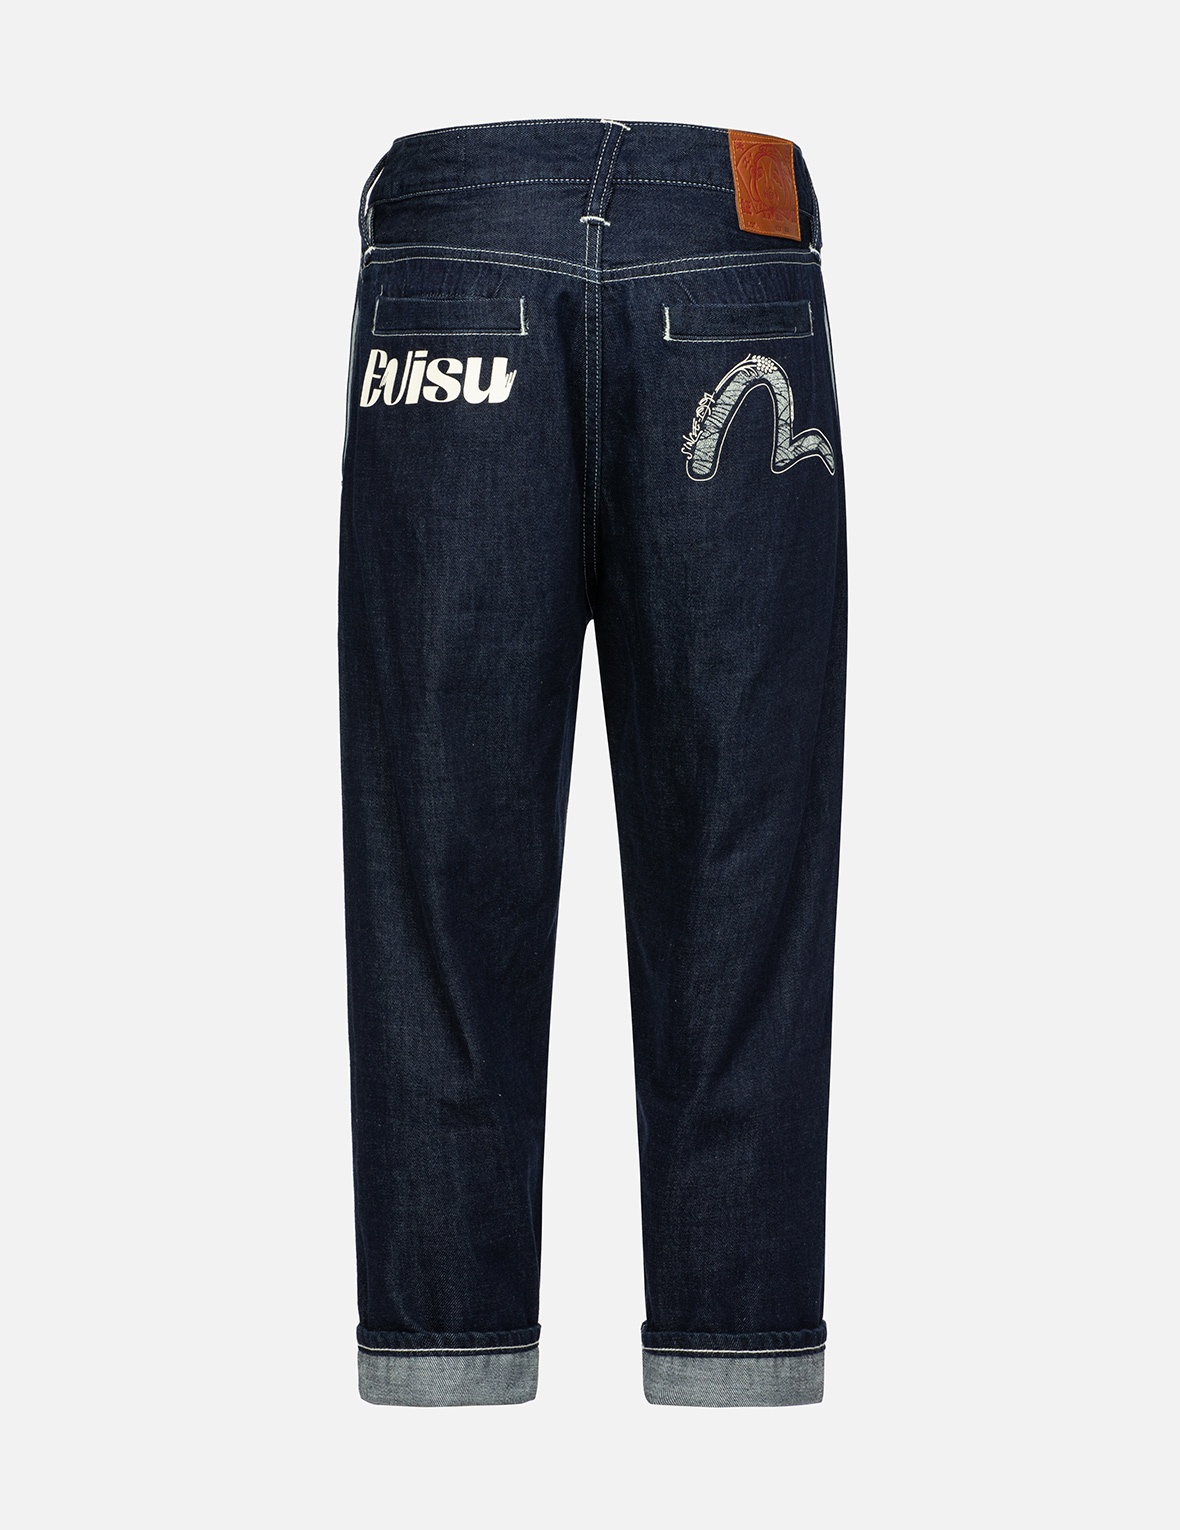 SEAGULL AND LOGO PRINT BALLOON FIT JEANS - 2